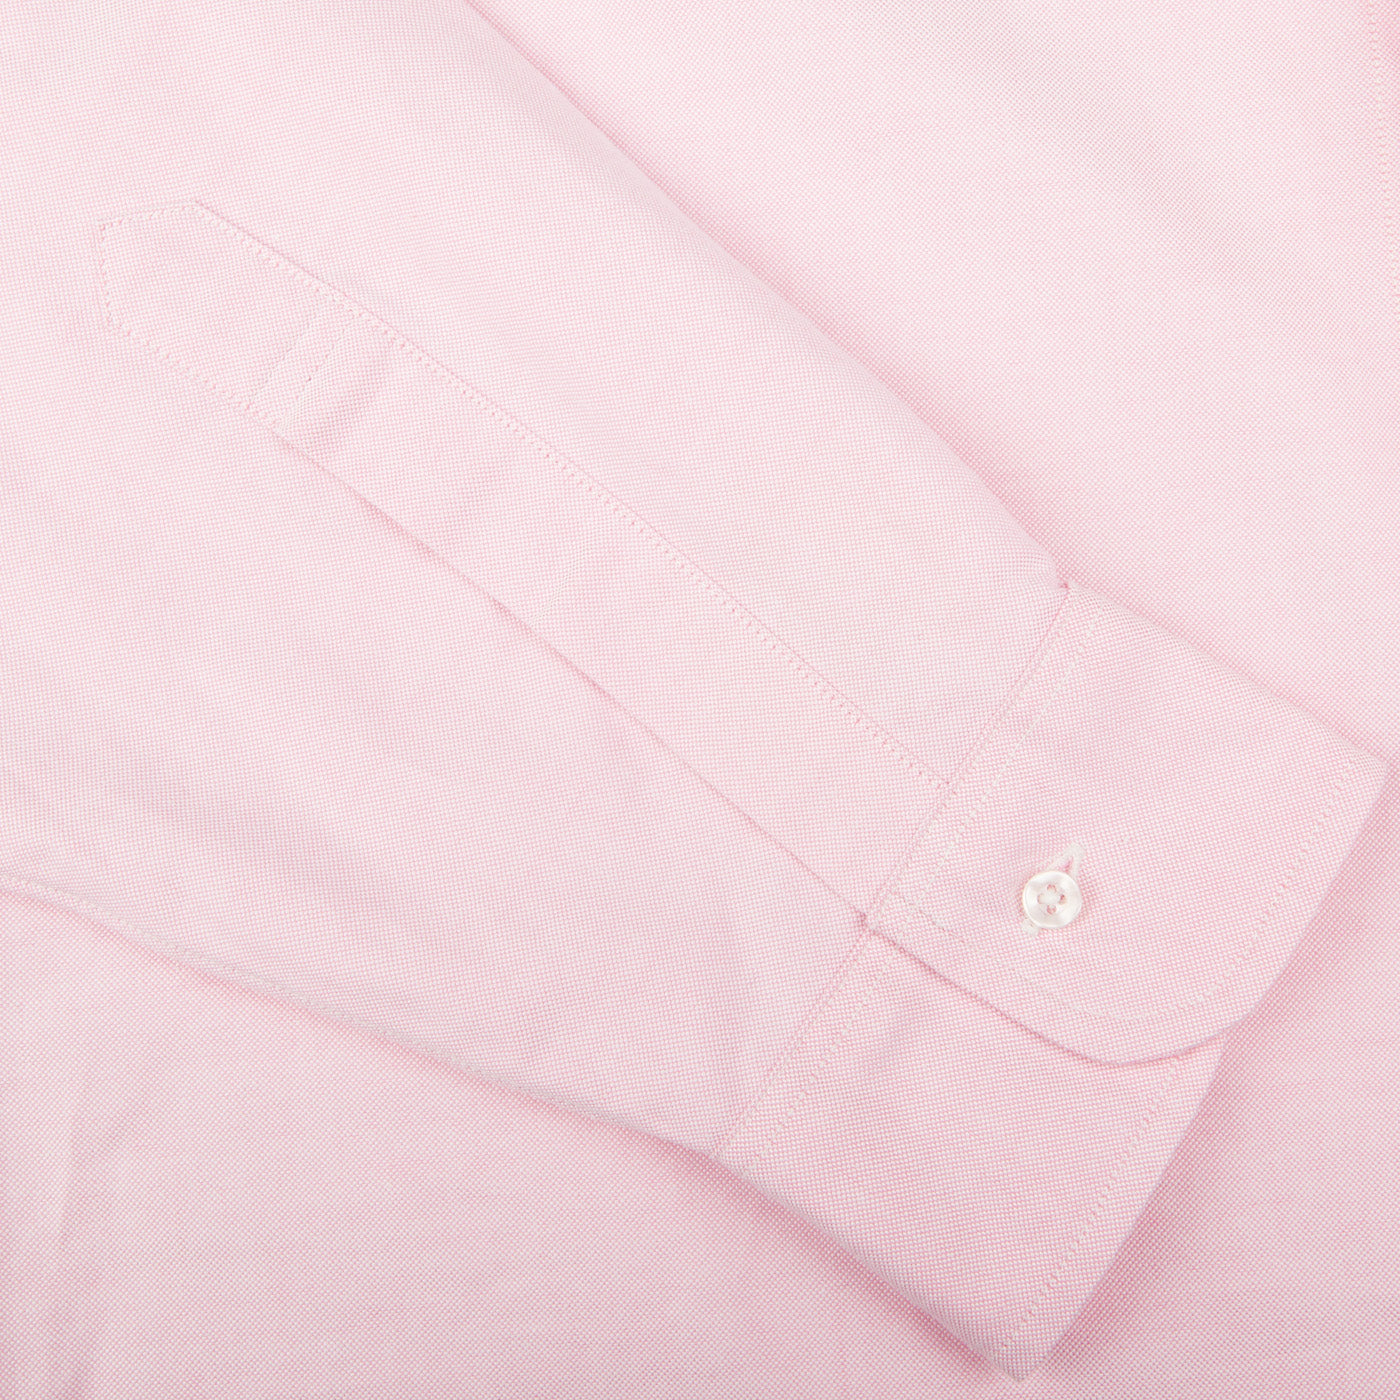 A close up of a Pink Cotton Oxford BD Regular Shirt by Far East Manufacturing on a white surface.